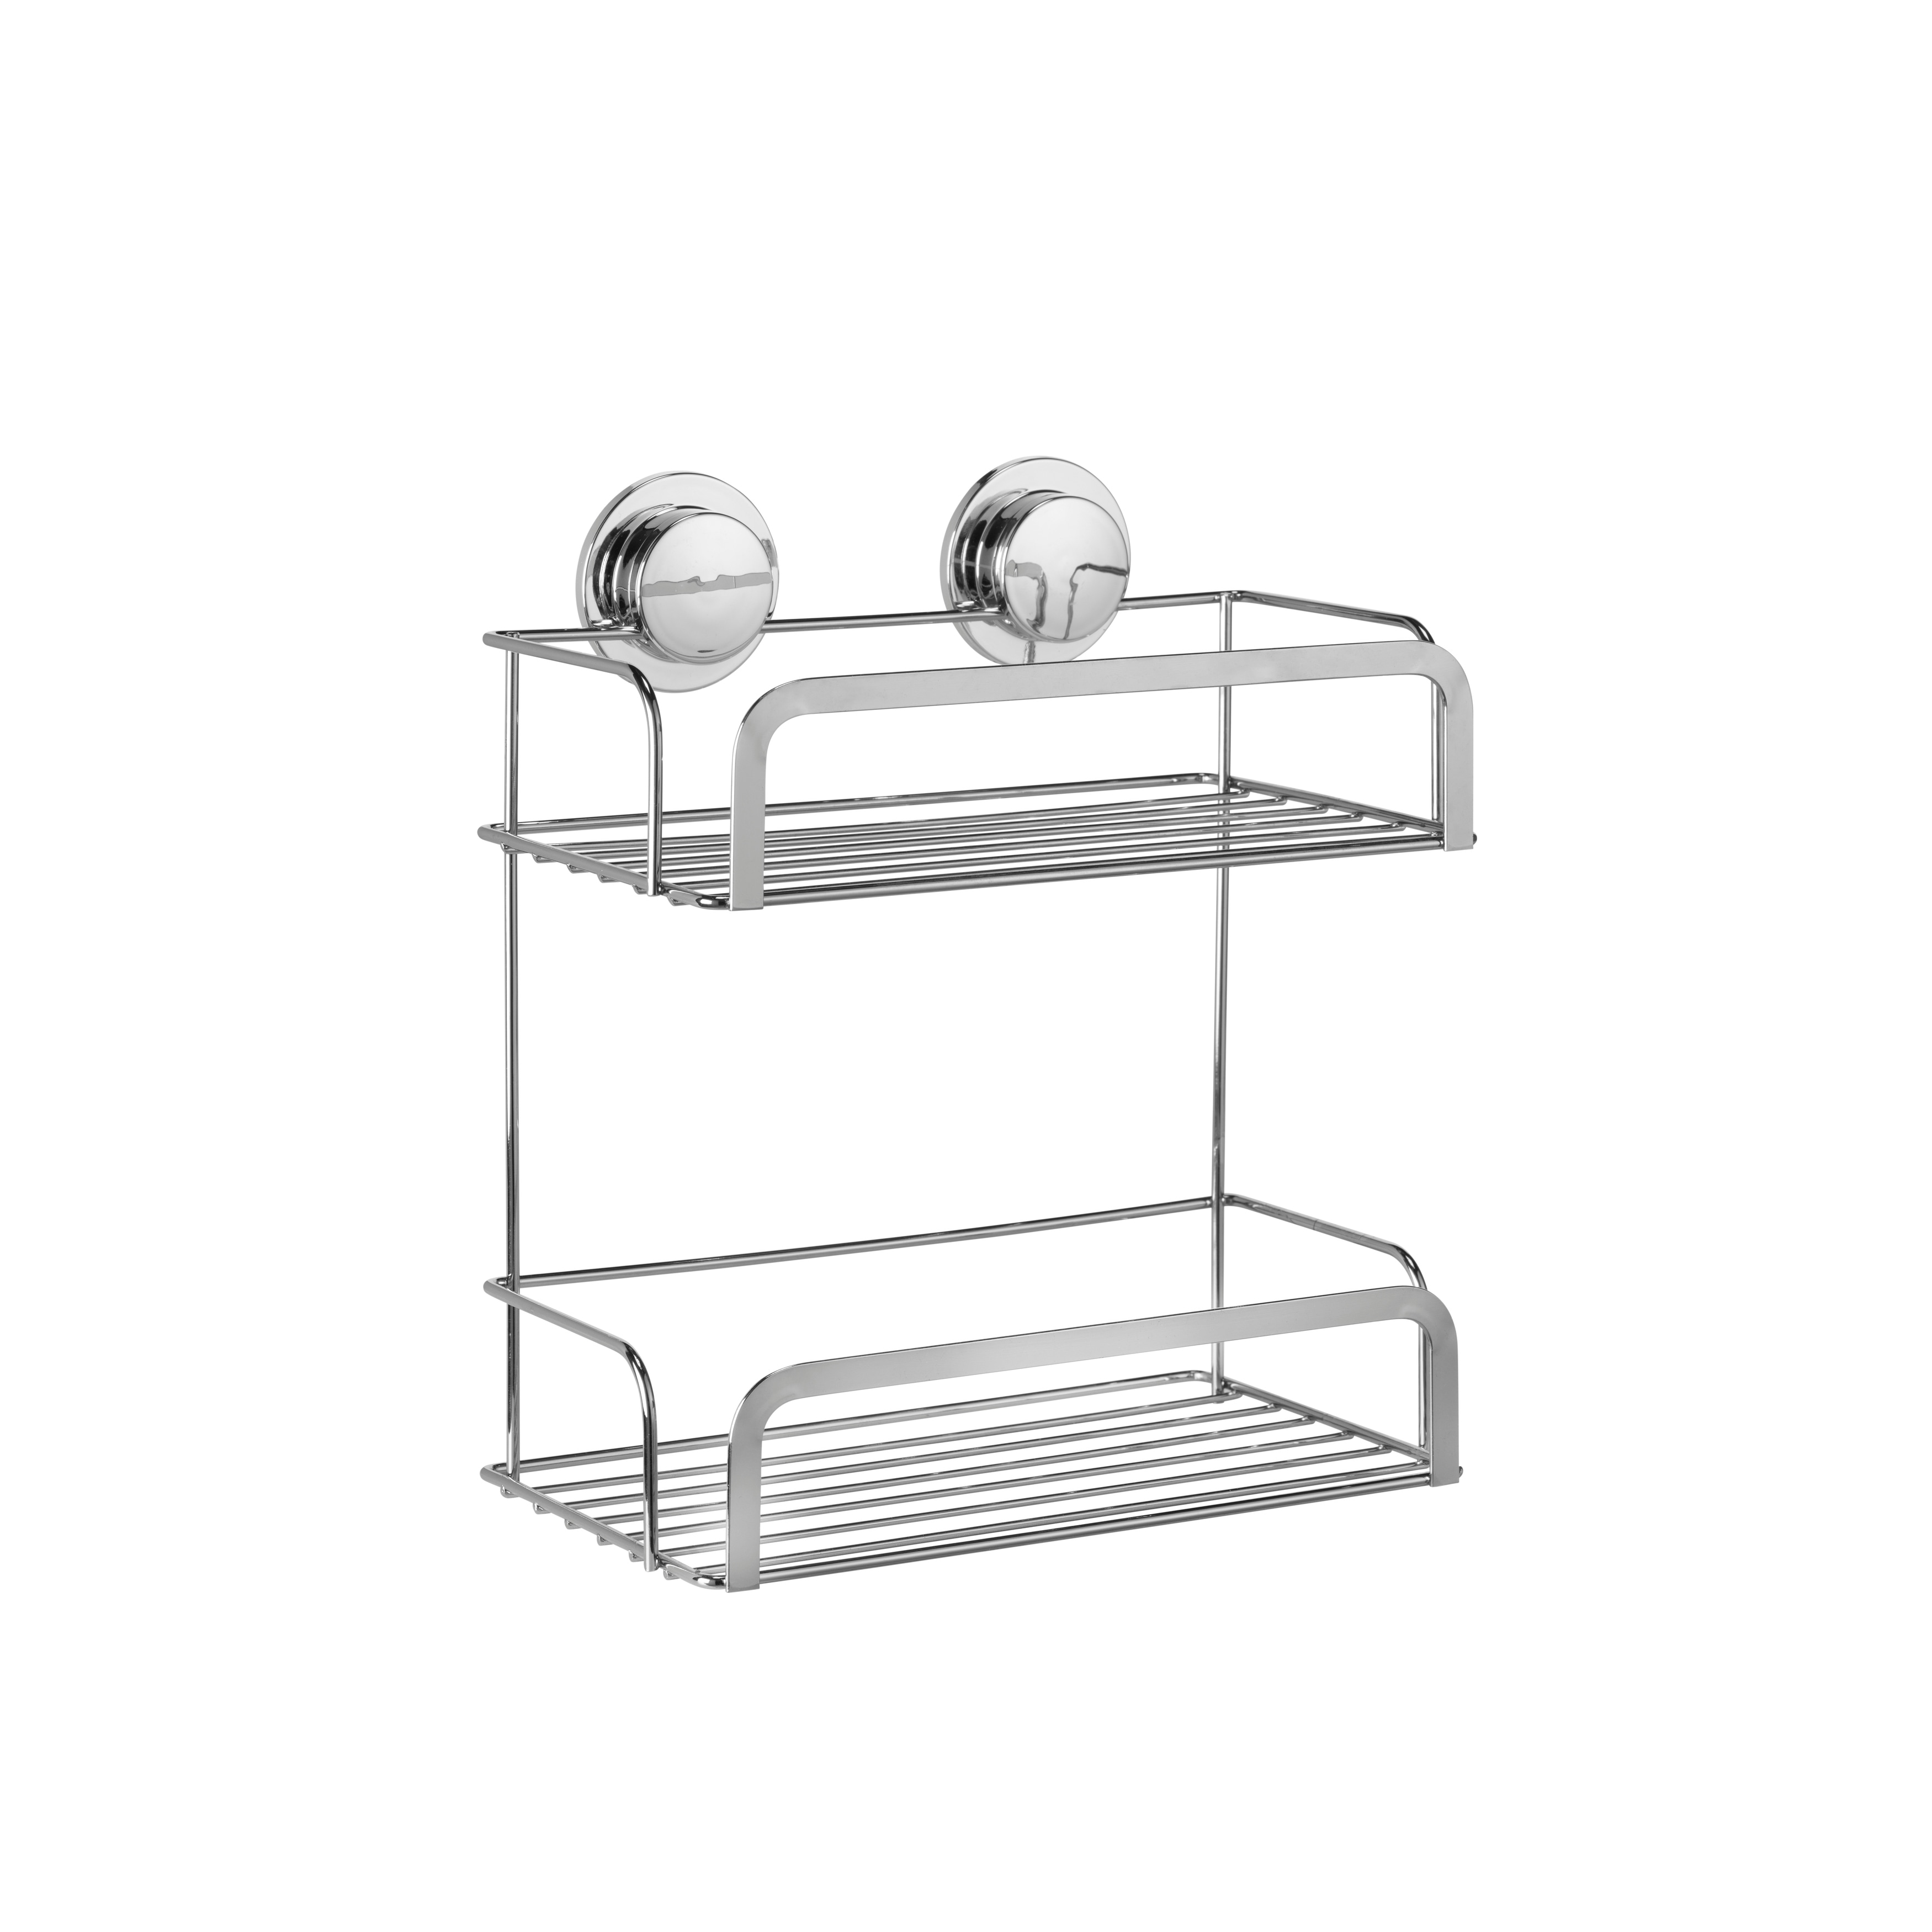 Croydex Stick 'n' Lock Adhesive Two Tier Shower Caddy, Chrome - On Sale -  Bed Bath & Beyond - 38077186